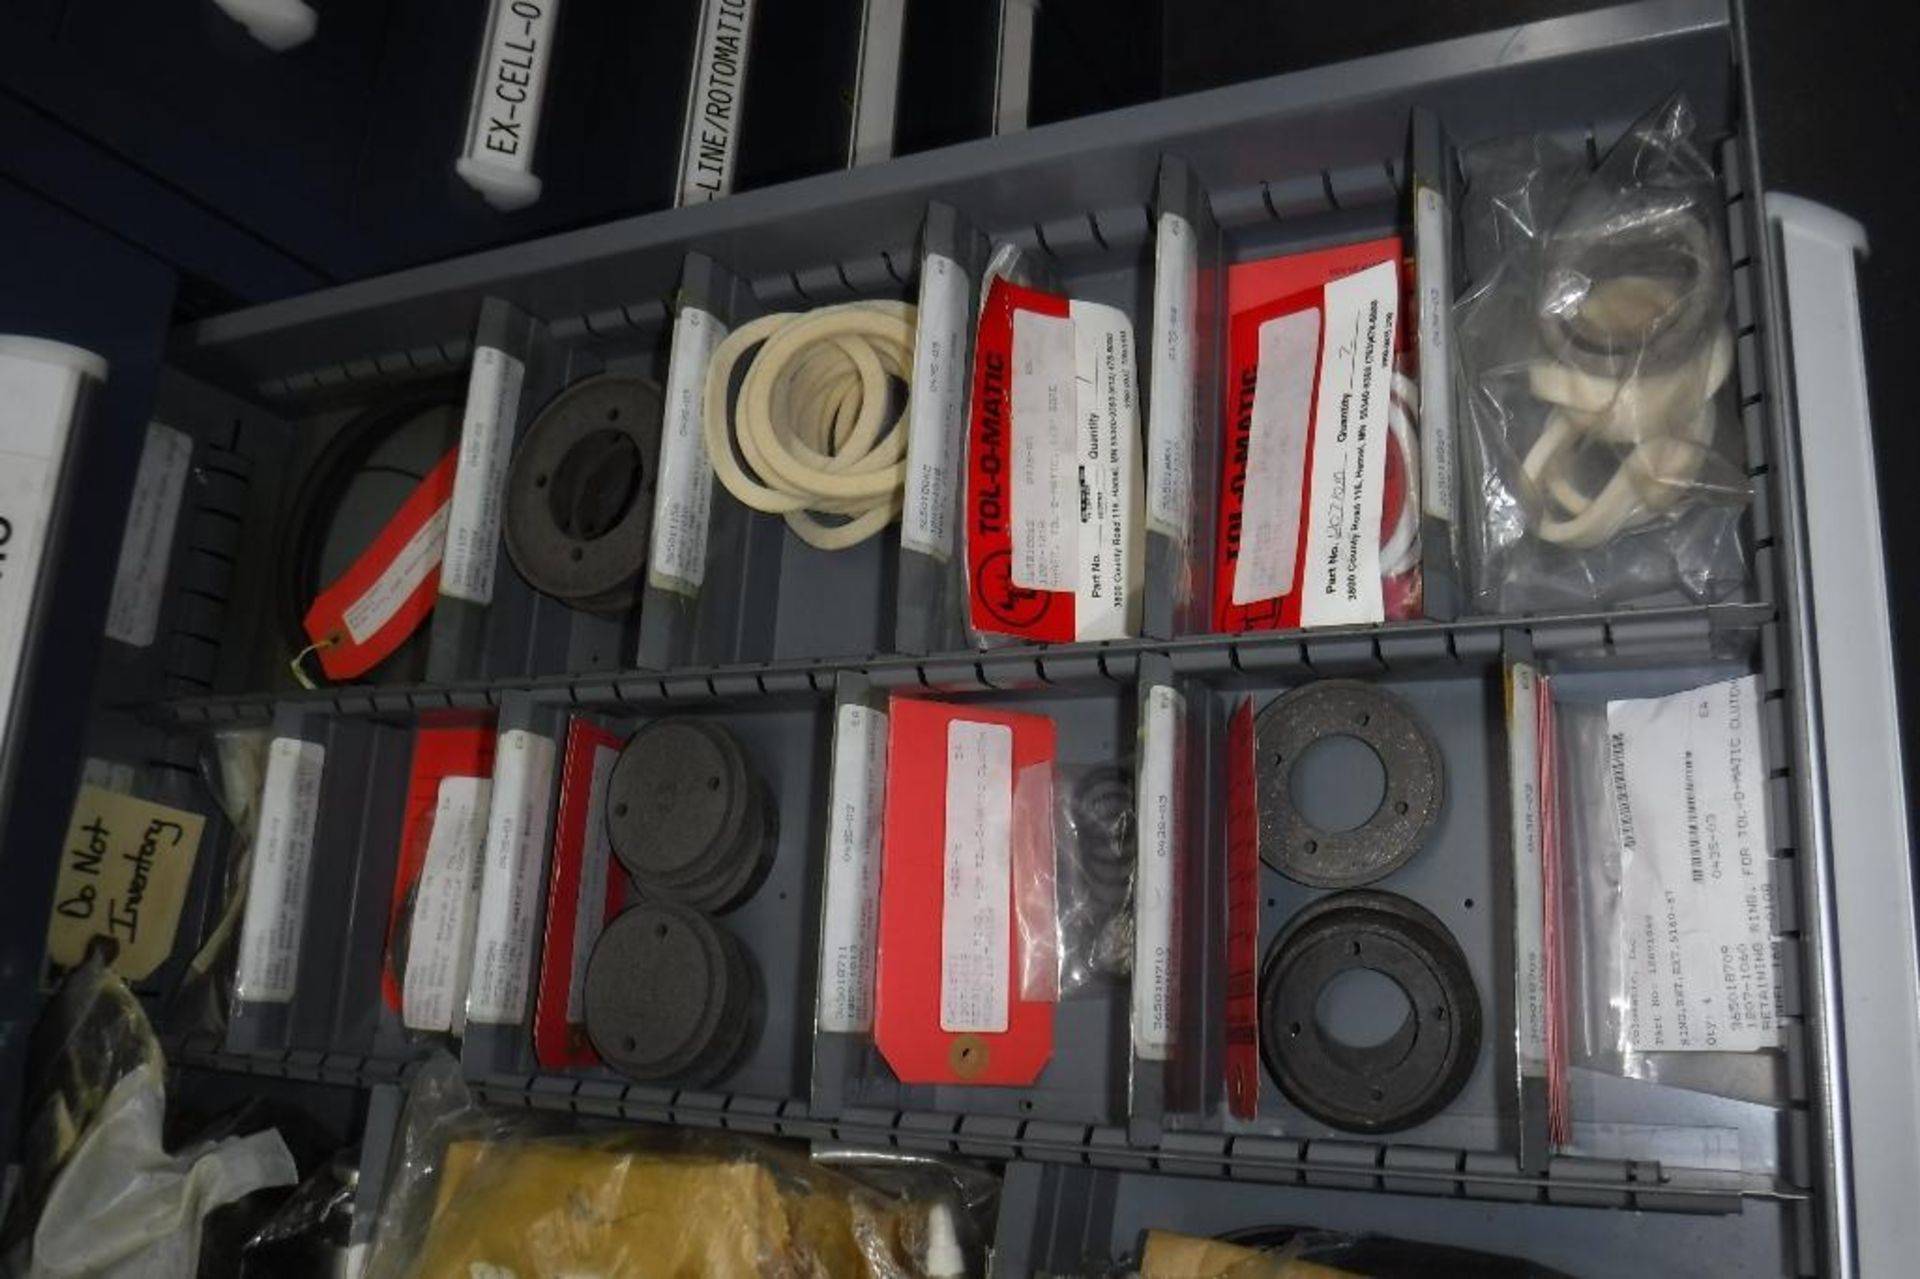 9-Drawer Vidmar Cabinet with Contents-Binks, Taylor Winfield, Sealant Equipment Parts, Vickers, Etc. - Image 9 of 13